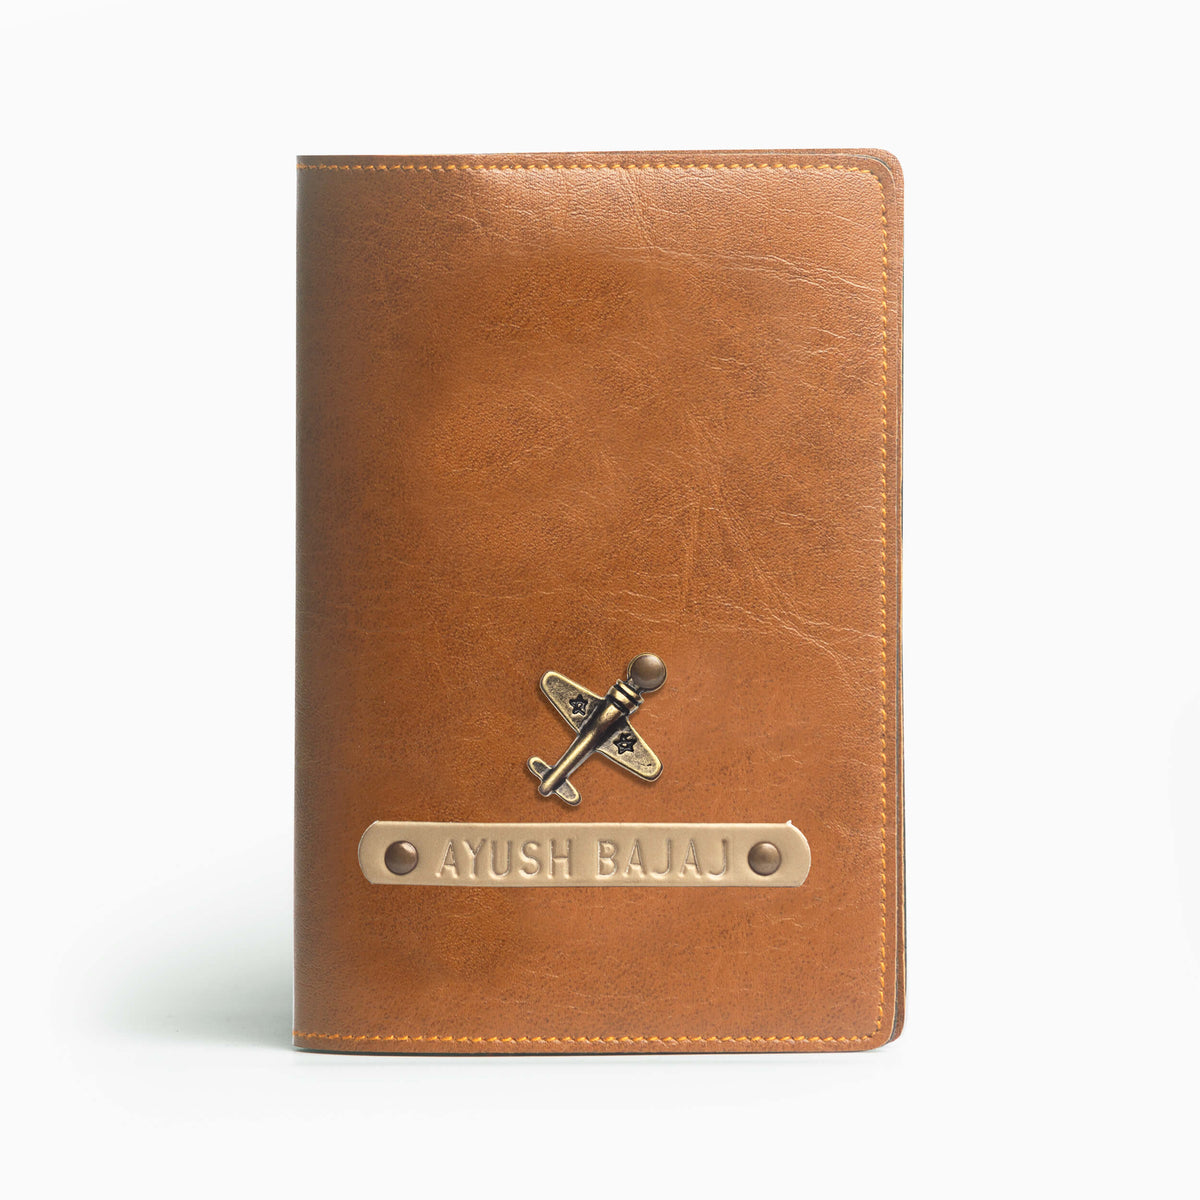 Personalized Passport Cover - Tan